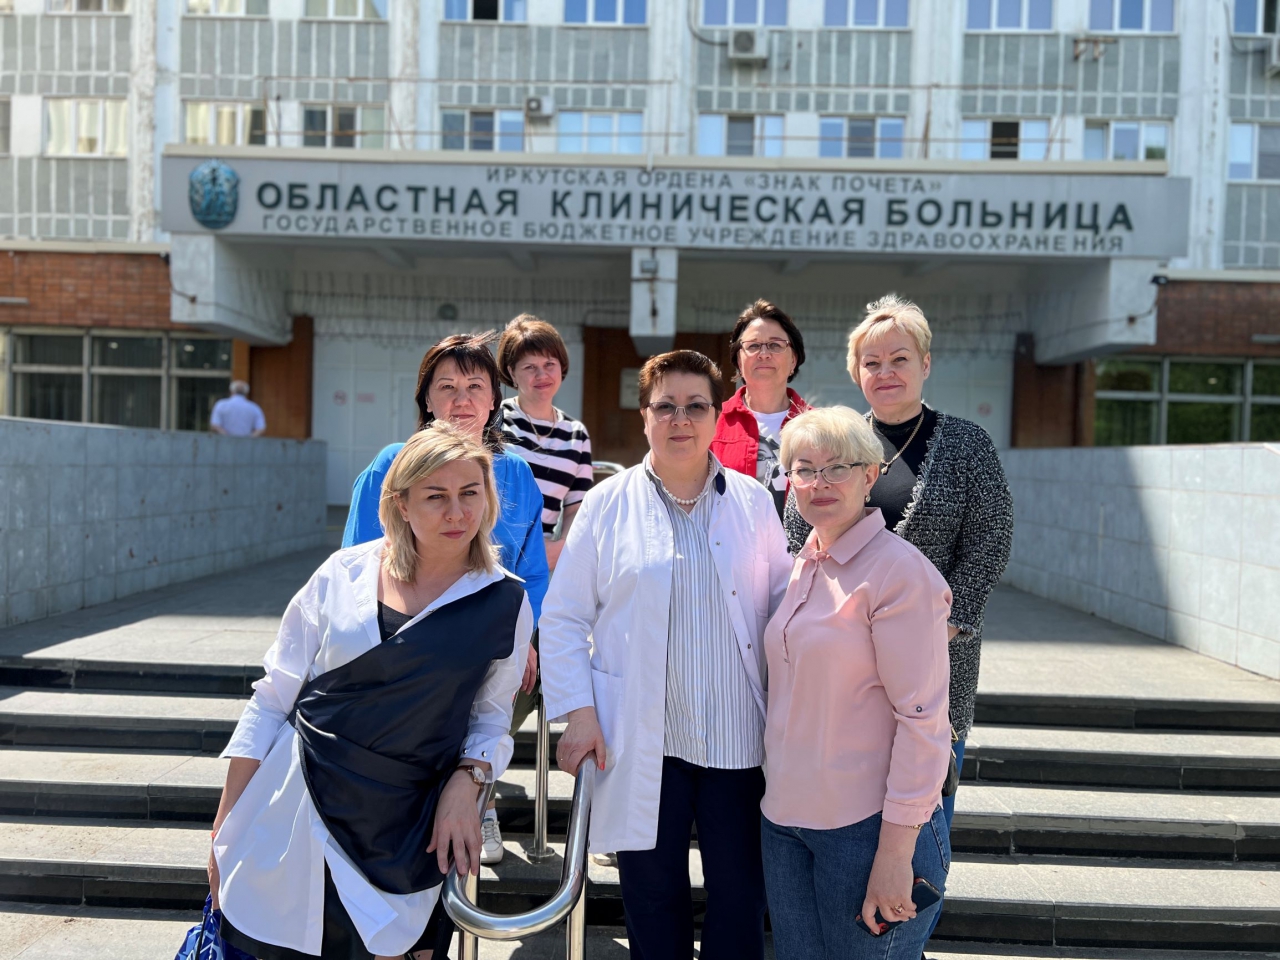 GBUZ IOKB was visited by a delegation from Cheremkhovo